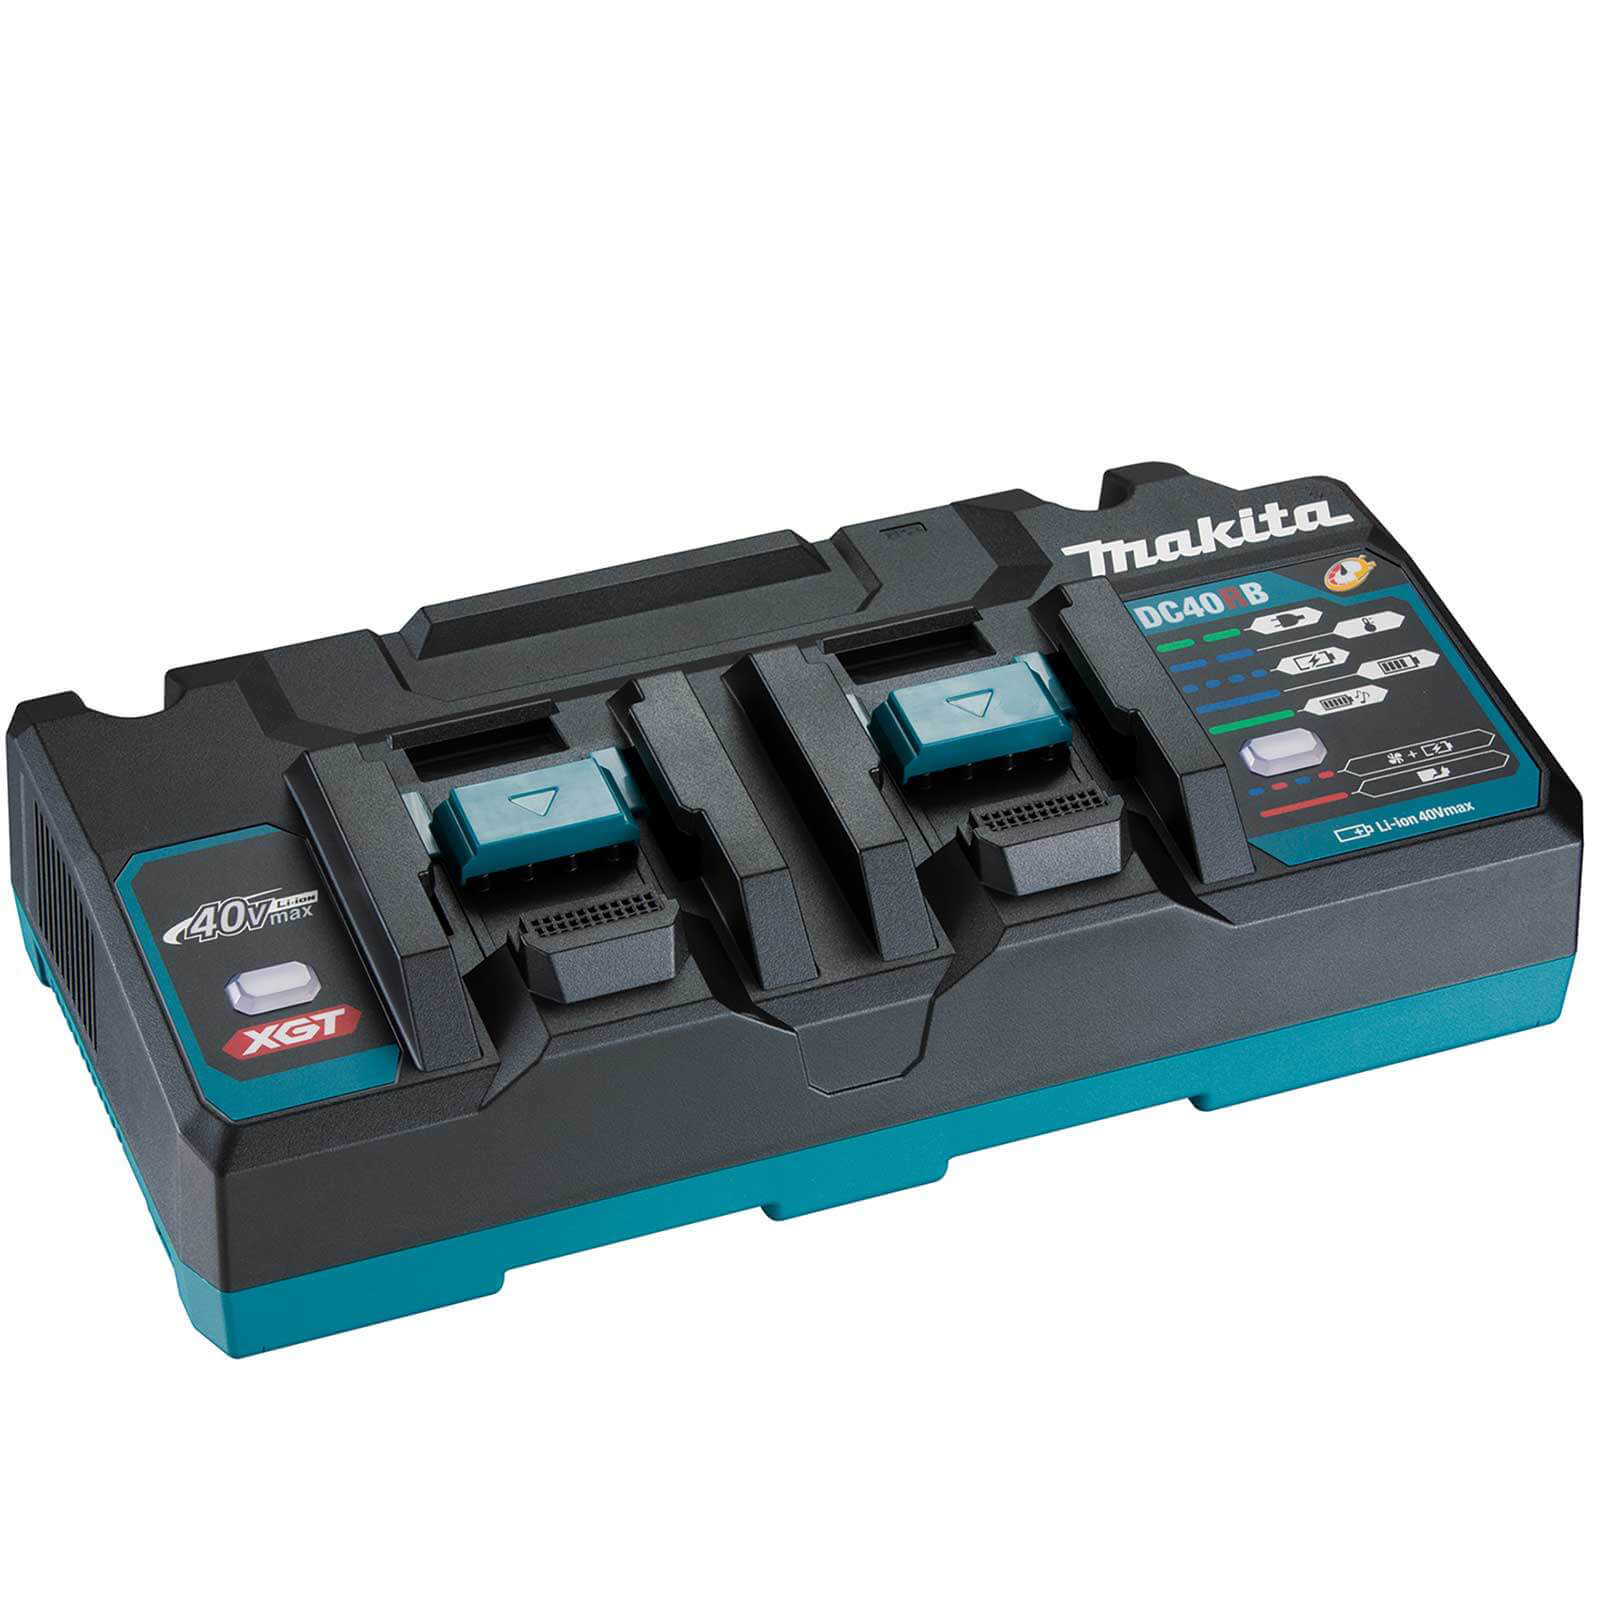 Image of Makita DC40RB 40v Max XGT Twin Port Battery Fast Charger 110v